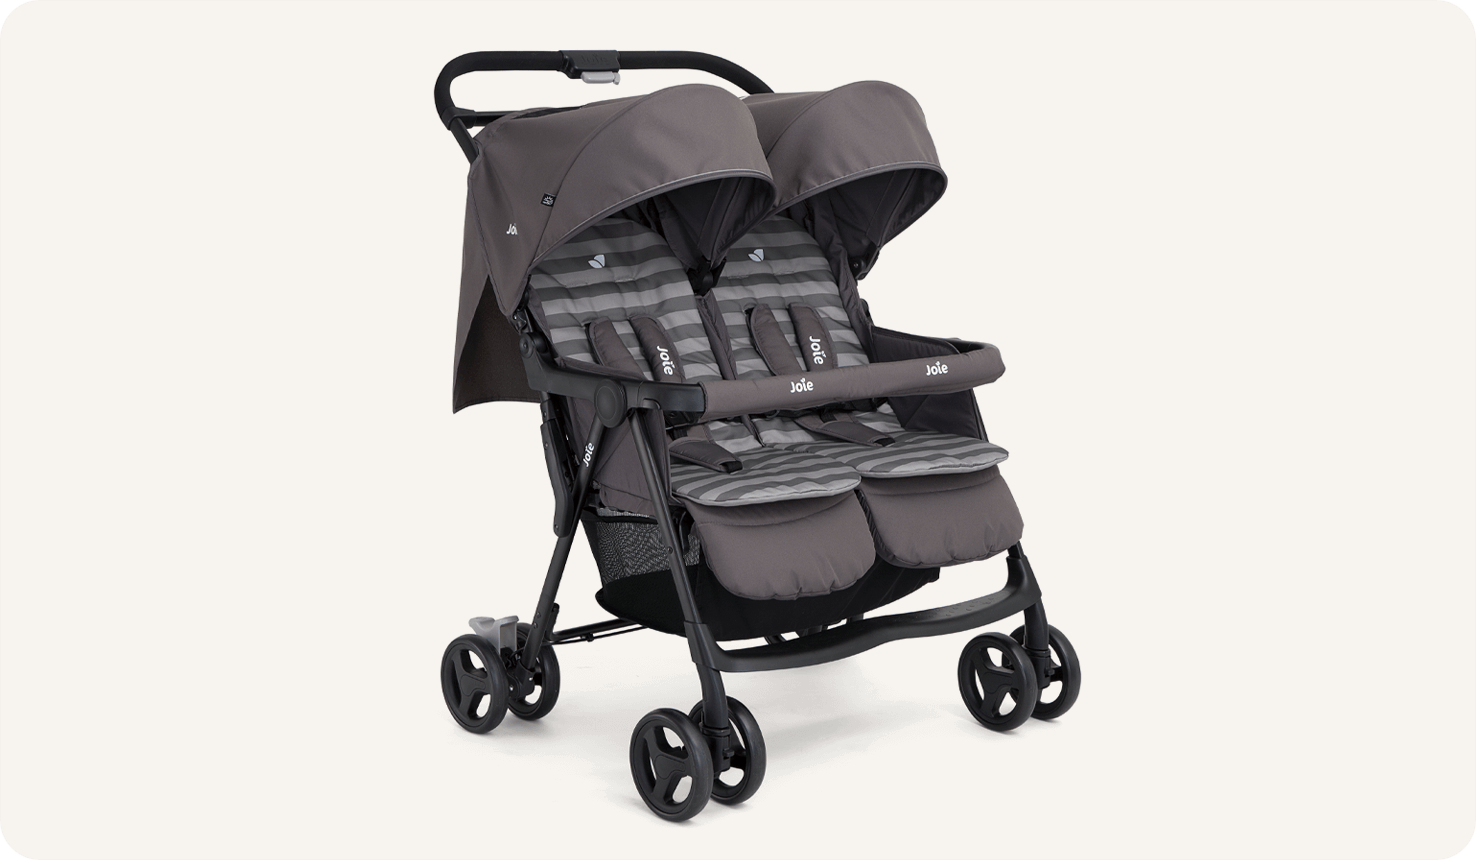   The Joie Aire Twin side-by-side double stroller in dark gray at an angle, with a peach coloured seat insert on the left seat and a light blue insert on the right seat.